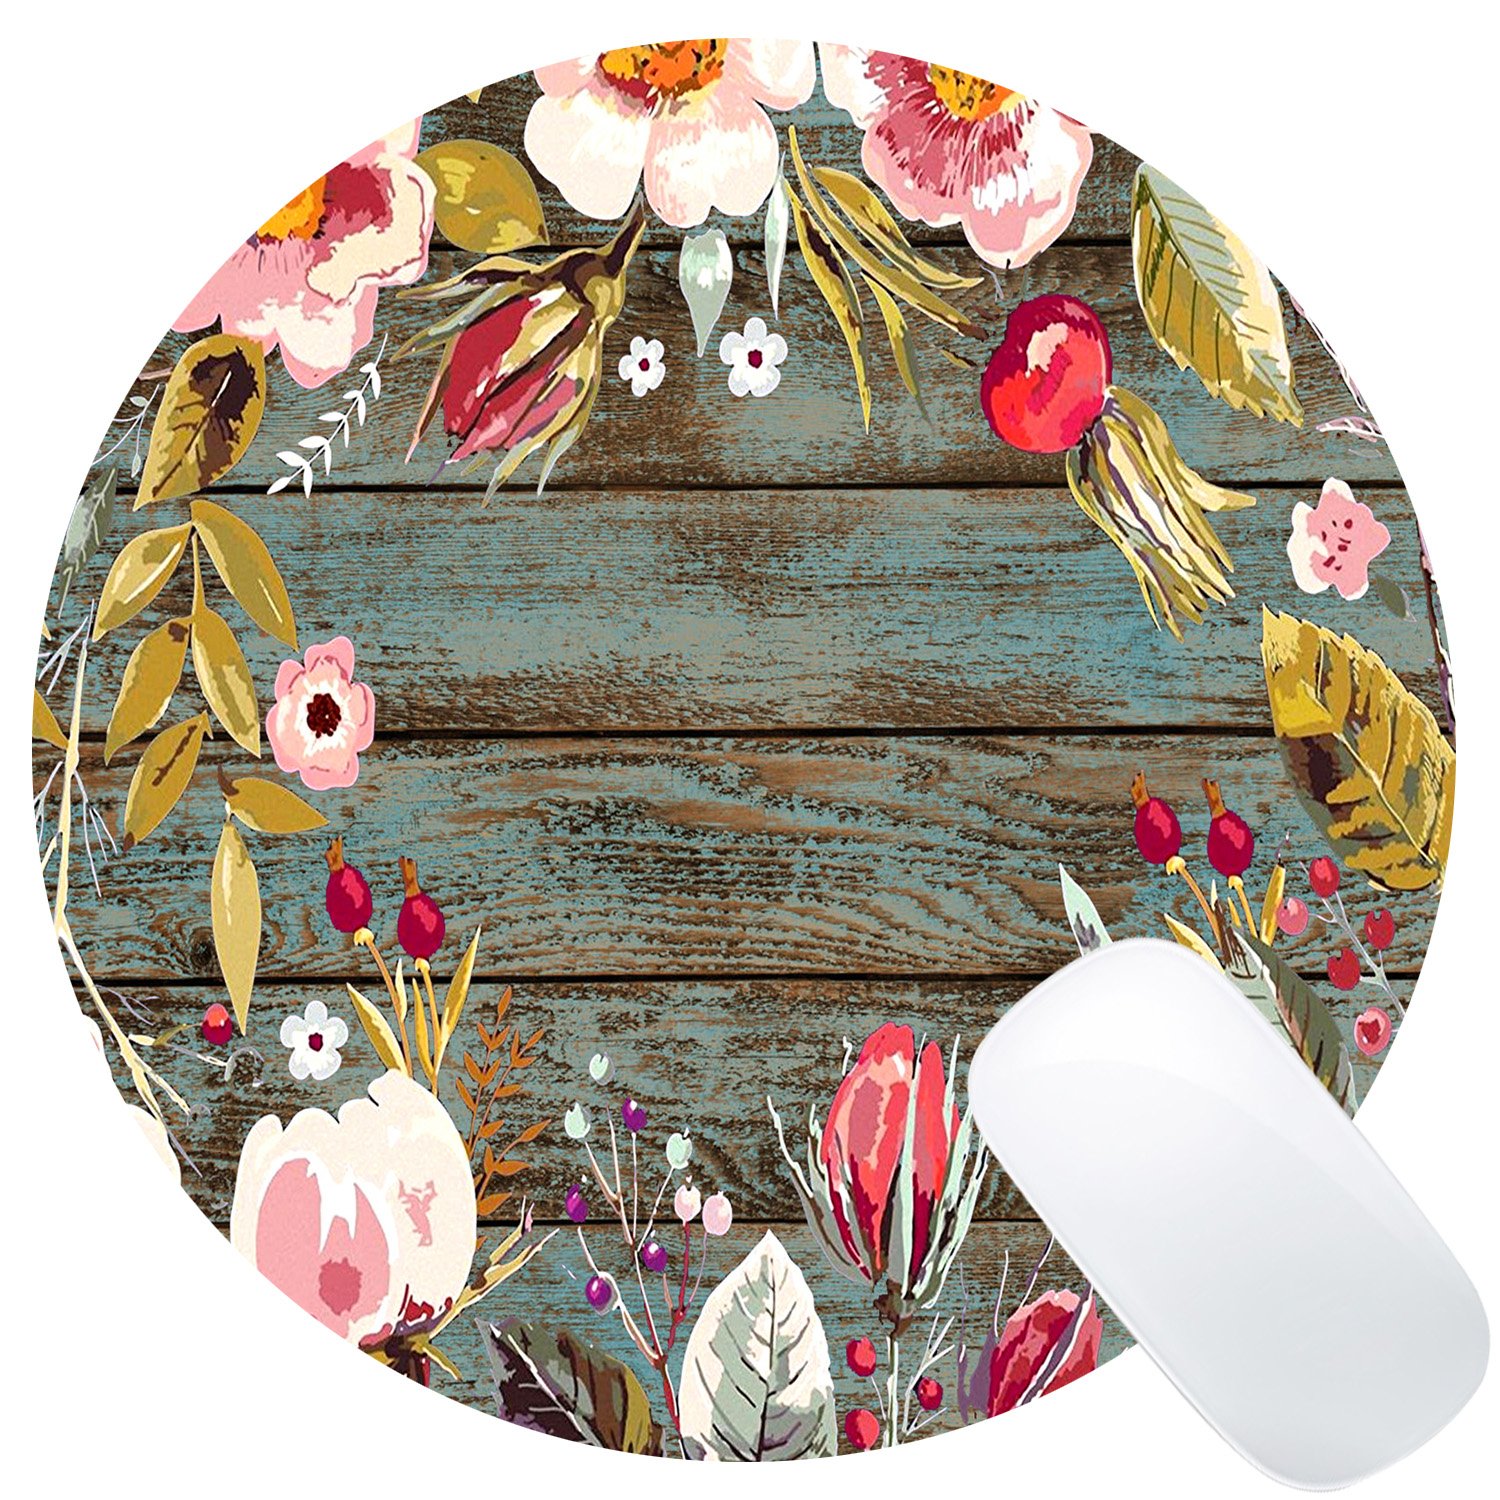 Book Cover Wknoon Cute Round Mouse Pad Custom, Vintage Hand Drawn Floral Wreath Art on Rustic Wood Circular Mouse Pads for Computers Laptop Color_CR37